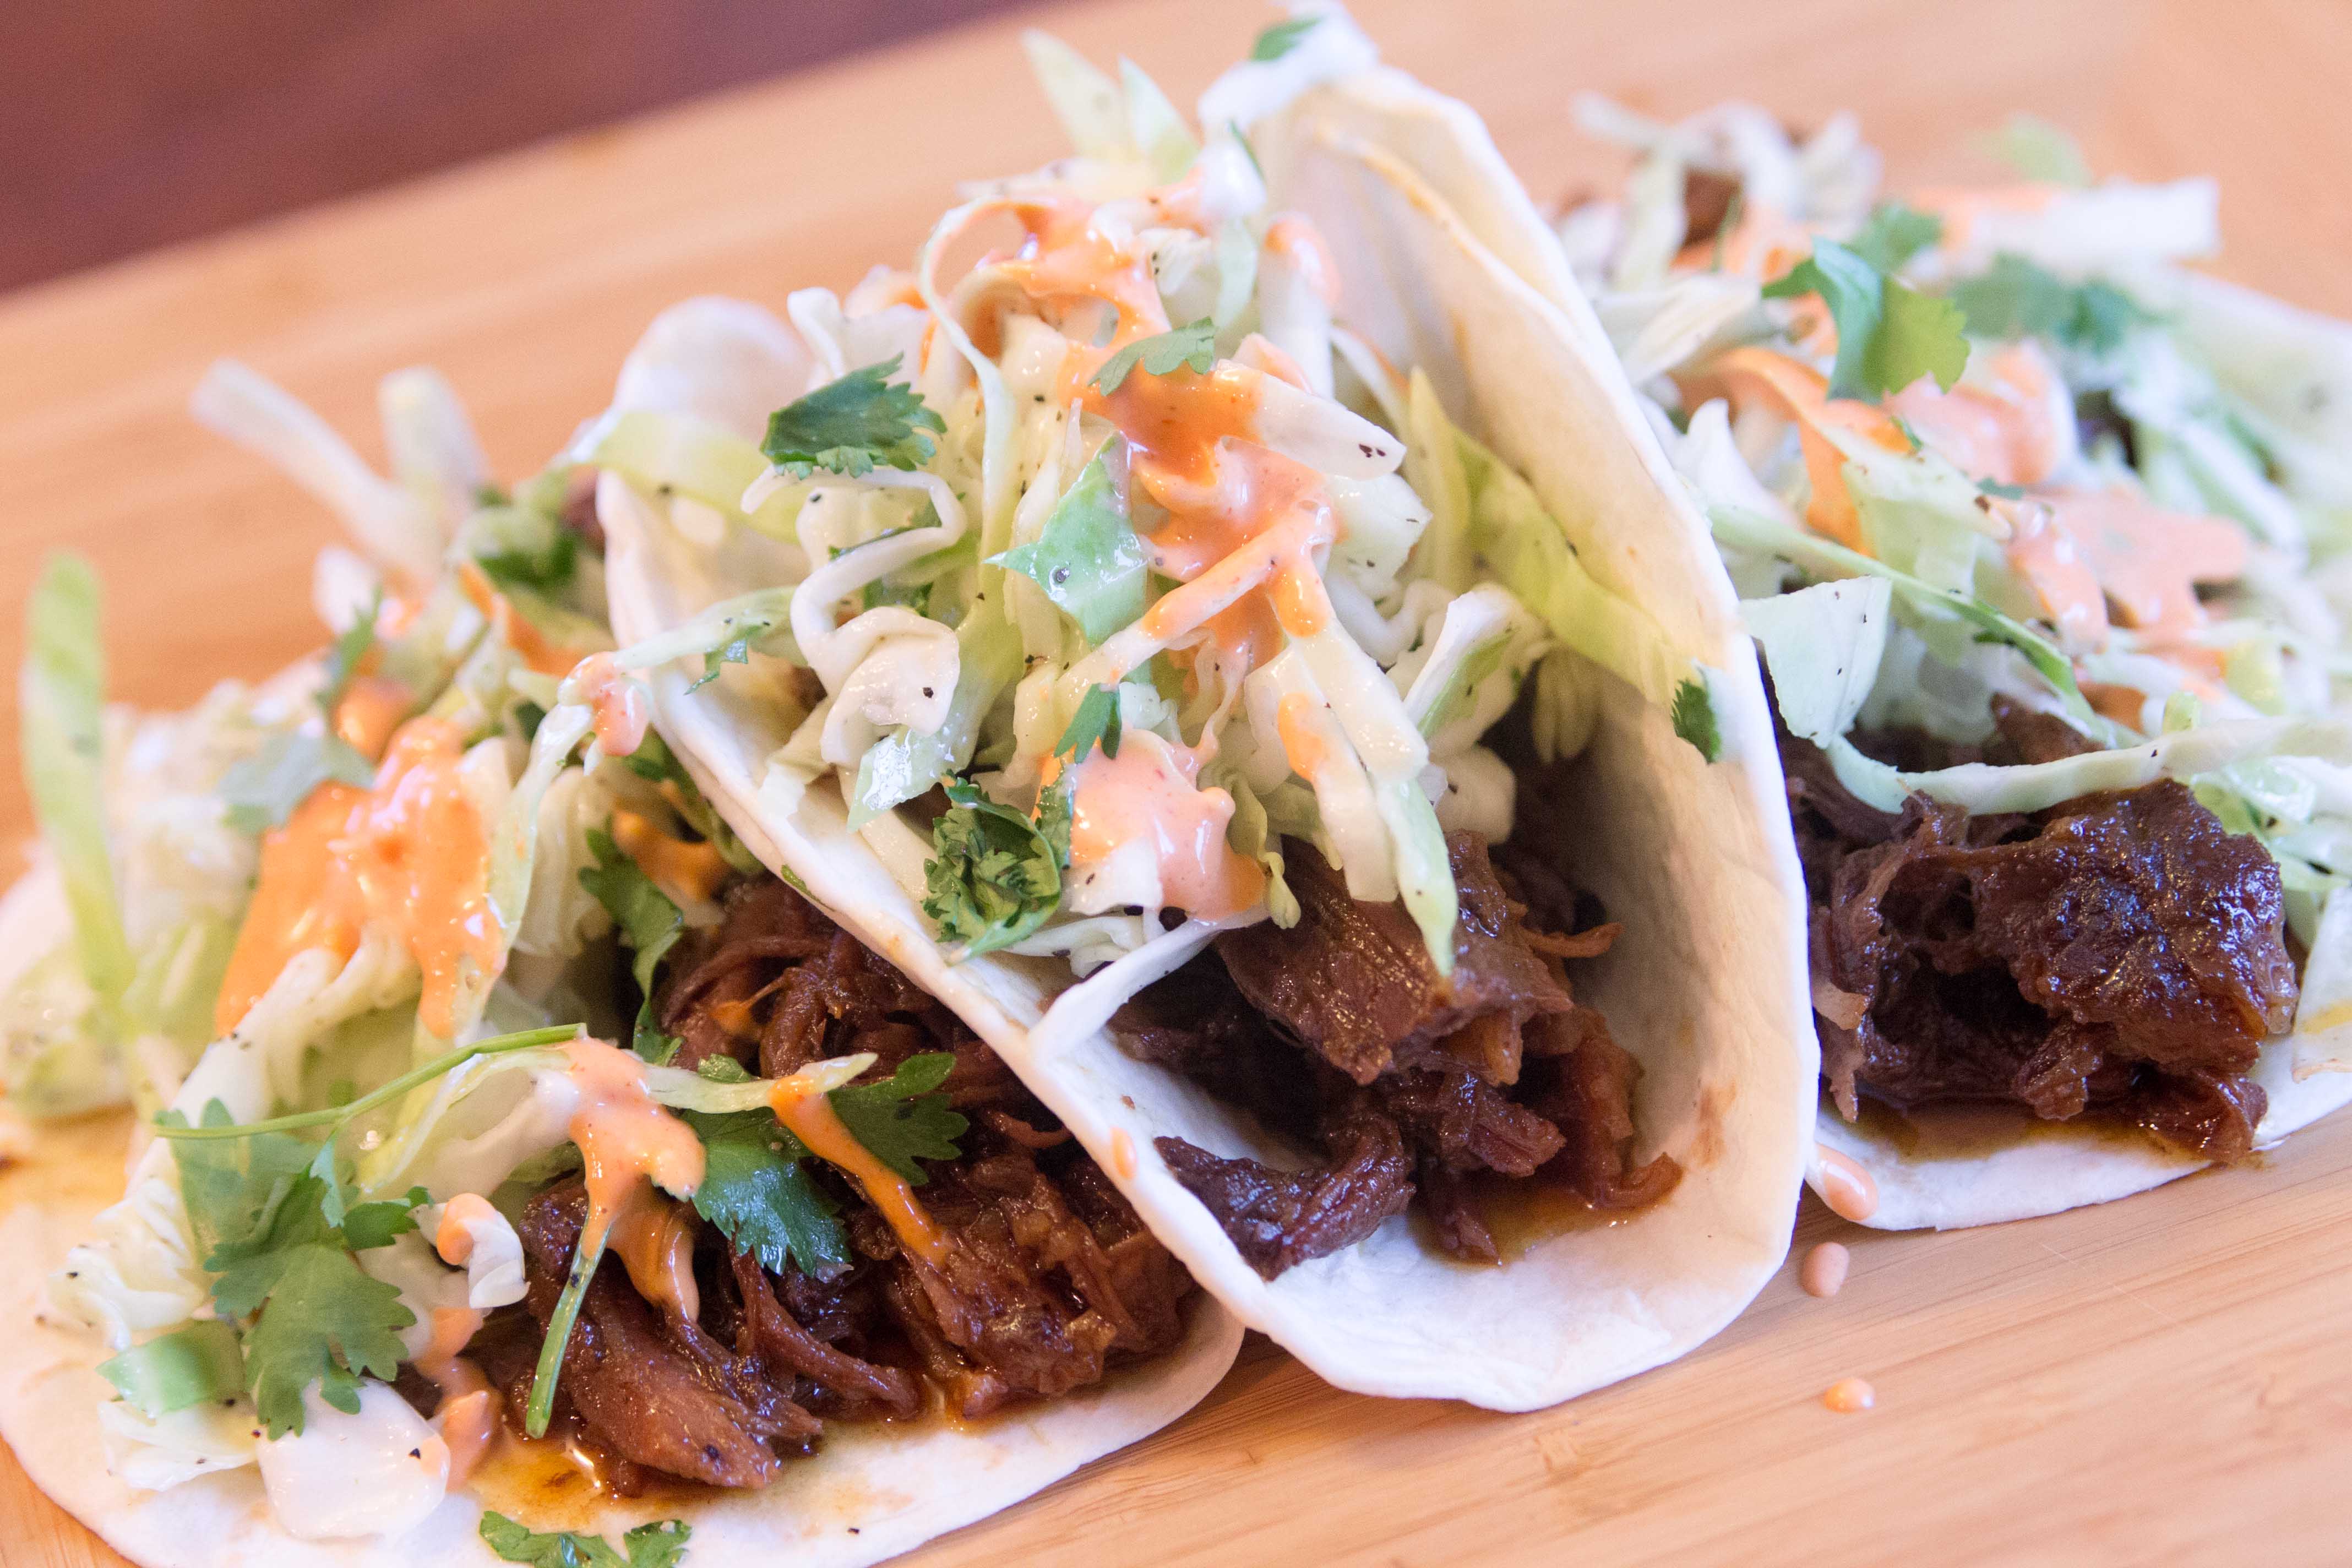 Korean BBQ Street Tacos with asian slaw made in the slow cooker.